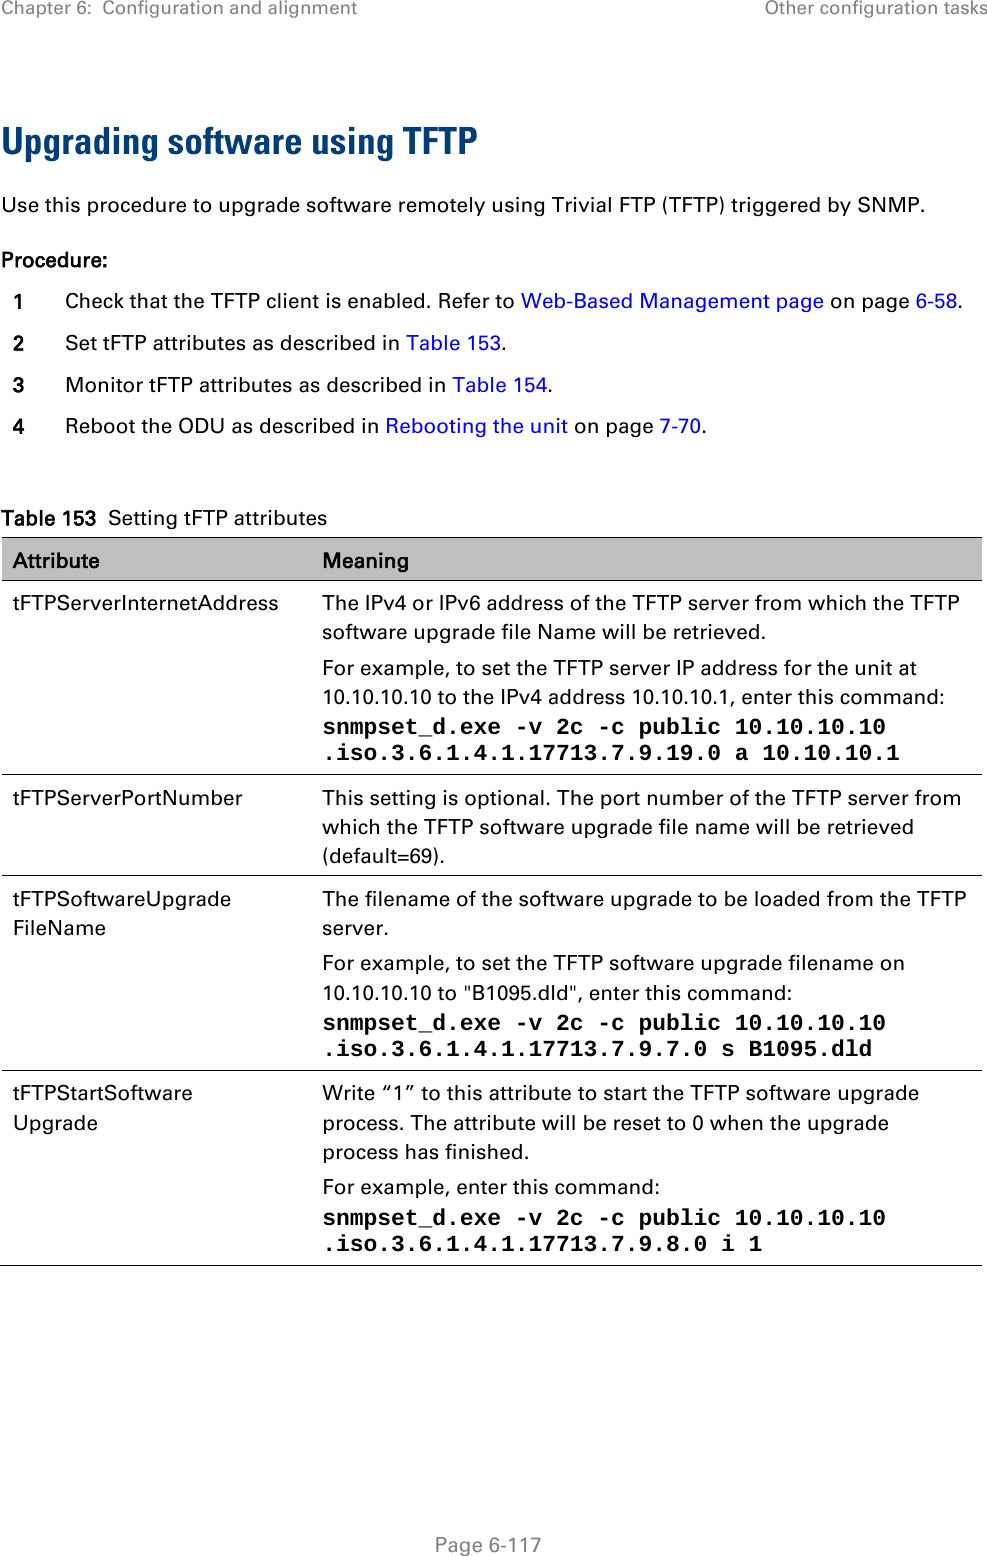 Chapter 6:  Configuration and alignment Other configuration tasks  Upgrading software using TFTP Use this procedure to upgrade software remotely using Trivial FTP (TFTP) triggered by SNMP. Procedure: 1 Check that the TFTP client is enabled. Refer to Web-Based Management page on page 6-58. 2 Set tFTP attributes as described in Table 153. 3 Monitor tFTP attributes as described in Table 154. 4 Reboot the ODU as described in Rebooting the unit on page 7-70.  Table 153  Setting tFTP attributes Attribute Meaning tFTPServerInternetAddress  The IPv4 or IPv6 address of the TFTP server from which the TFTP software upgrade file Name will be retrieved. For example, to set the TFTP server IP address for the unit at 10.10.10.10 to the IPv4 address 10.10.10.1, enter this command:  snmpset_d.exe -v 2c -c public 10.10.10.10 .iso.3.6.1.4.1.17713.7.9.19.0 a 10.10.10.1  tFTPServerPortNumber This setting is optional. The port number of the TFTP server from which the TFTP software upgrade file name will be retrieved (default=69). tFTPSoftwareUpgrade FileName The filename of the software upgrade to be loaded from the TFTP server. For example, to set the TFTP software upgrade filename on 10.10.10.10 to &quot;B1095.dld&quot;, enter this command: snmpset_d.exe -v 2c -c public 10.10.10.10 .iso.3.6.1.4.1.17713.7.9.7.0 s B1095.dld tFTPStartSoftware Upgrade Write “1” to this attribute to start the TFTP software upgrade process. The attribute will be reset to 0 when the upgrade process has finished. For example, enter this command: snmpset_d.exe -v 2c -c public 10.10.10.10 .iso.3.6.1.4.1.17713.7.9.8.0 i 1      Page 6-117 